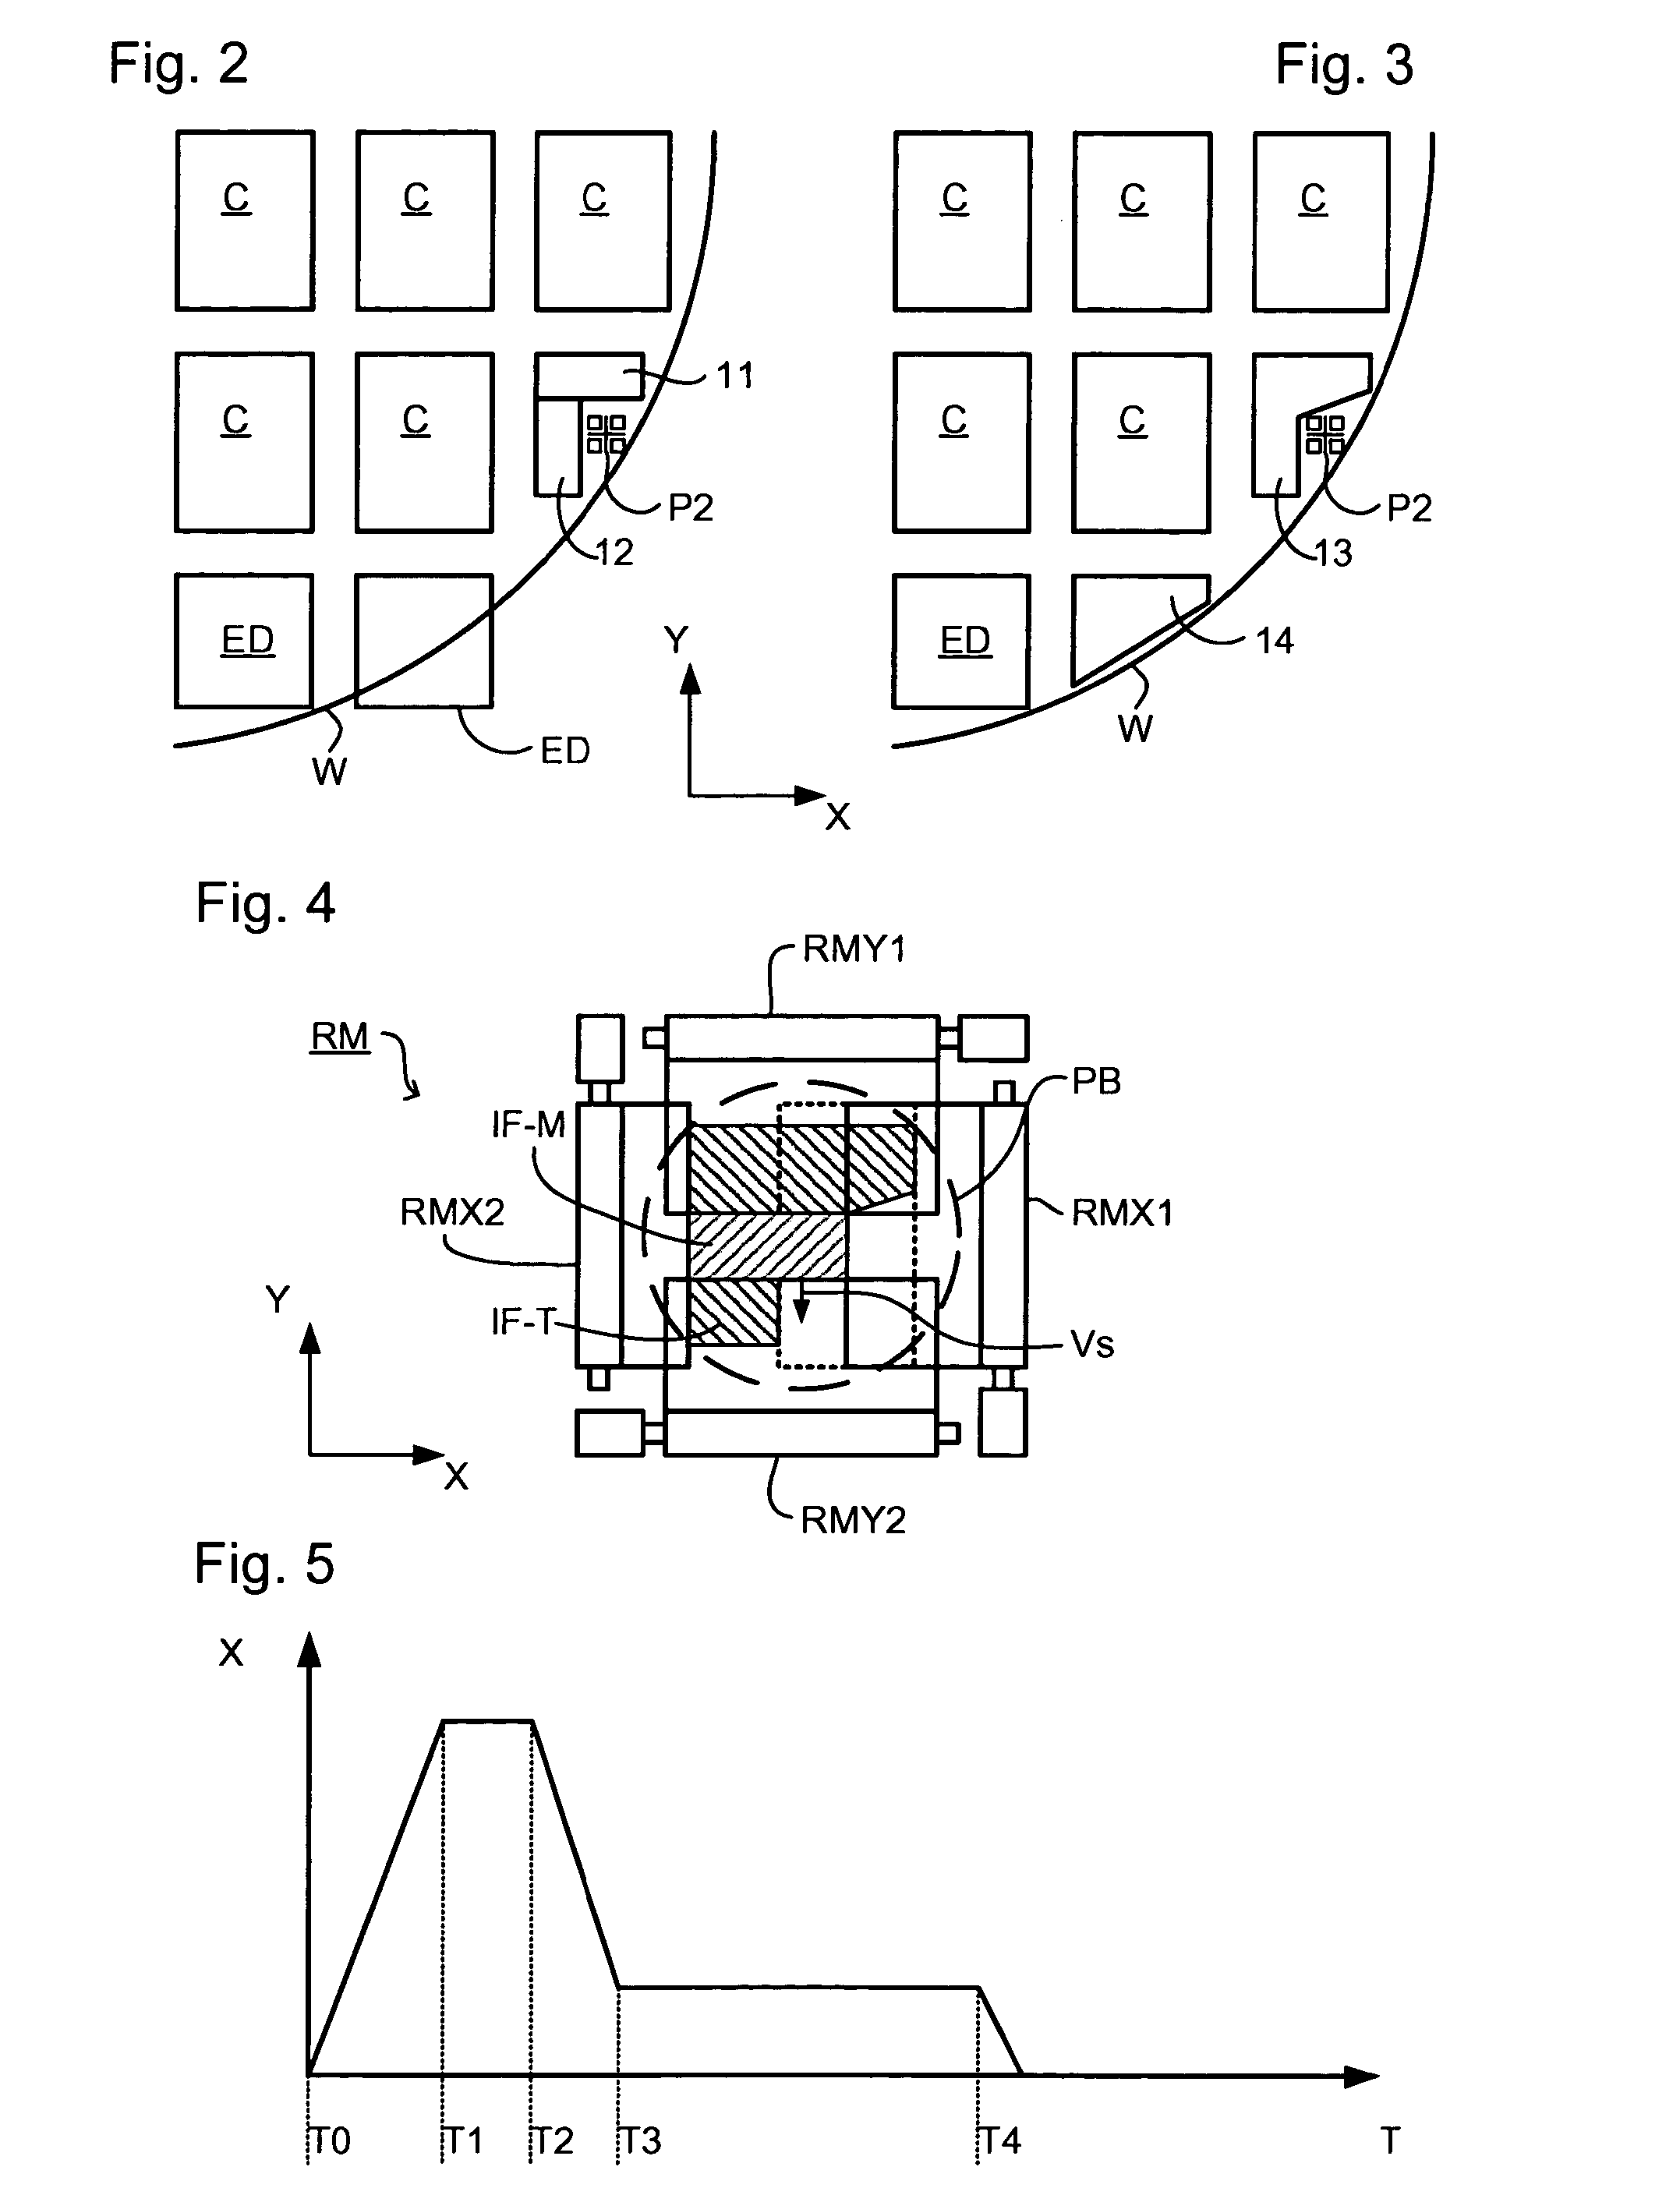 Method of manufacturing a device, device manufactured thereby, computer program and lithographic apparatus